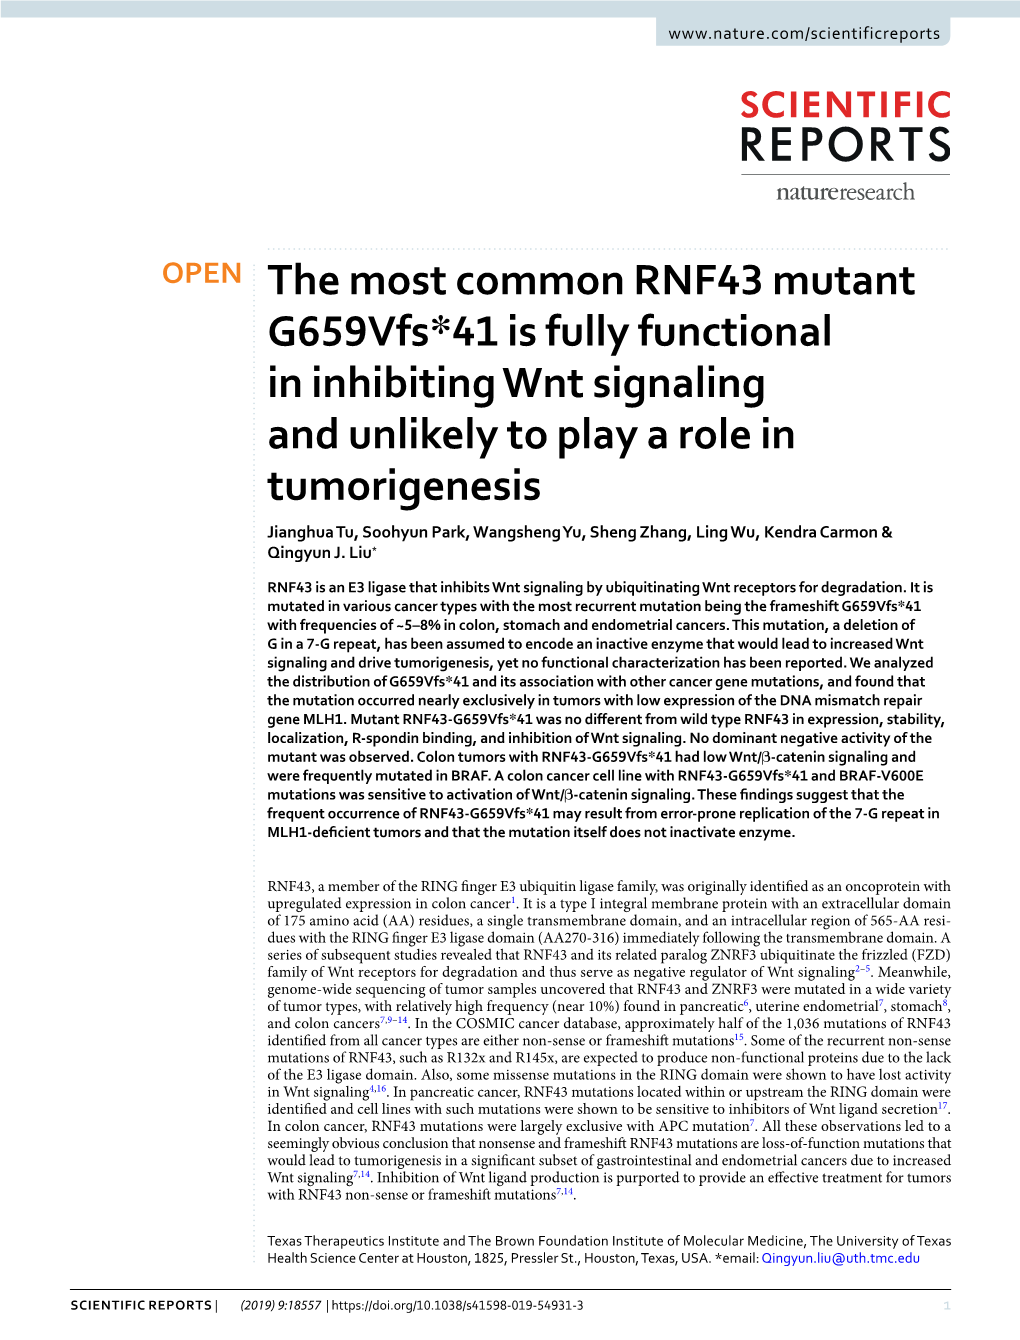 The Most Common RNF43 Mutant G659vfs*41 Is Fully Functional In